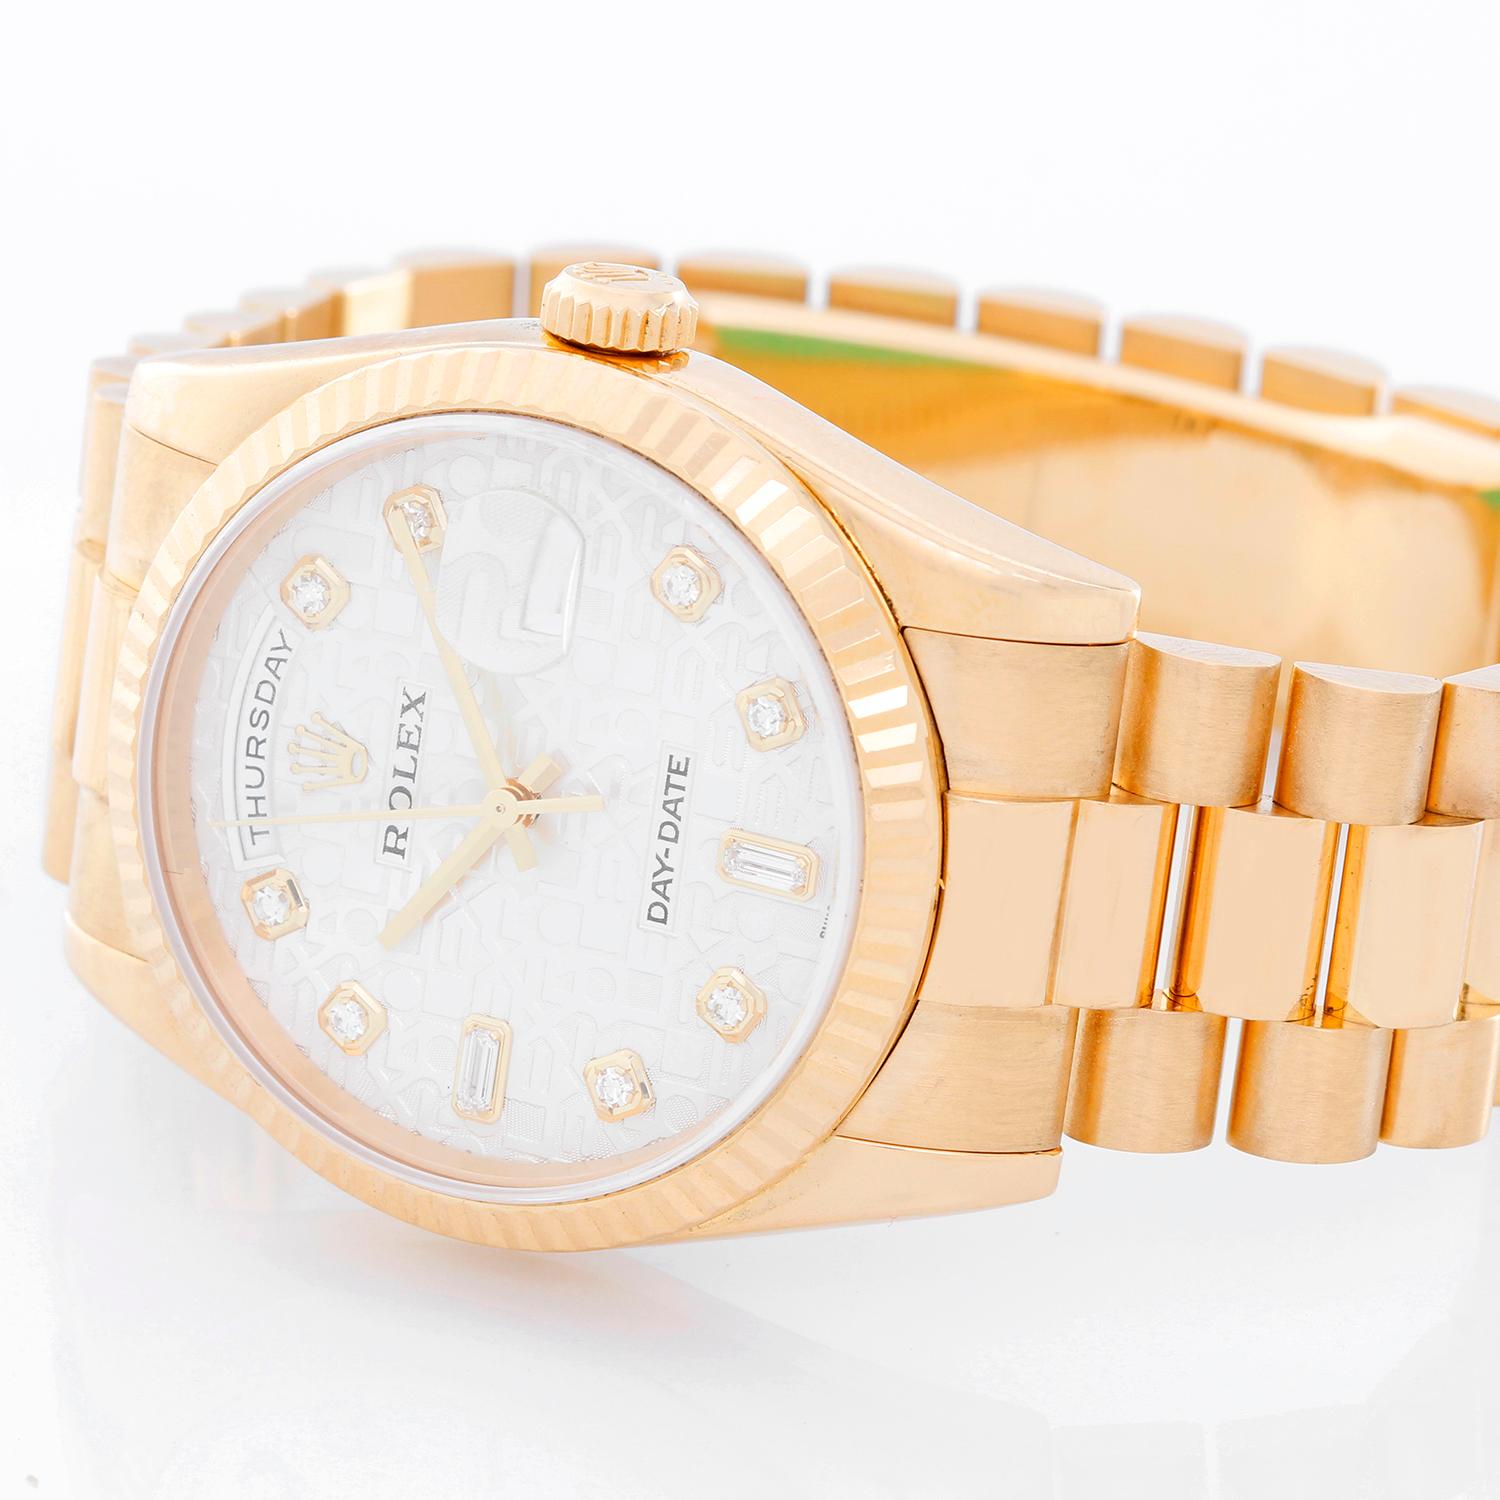 Rolex President Day-Date Men's 18k Gold Watch White Jubilee Diamond Dial 118238 - Automatic winding, 31 jewels, Quickset, sapphire crystal. 18k yellow gold case with fluted bezel (36mm diameter). White Jubilee diamond dial . 18k yellow gold